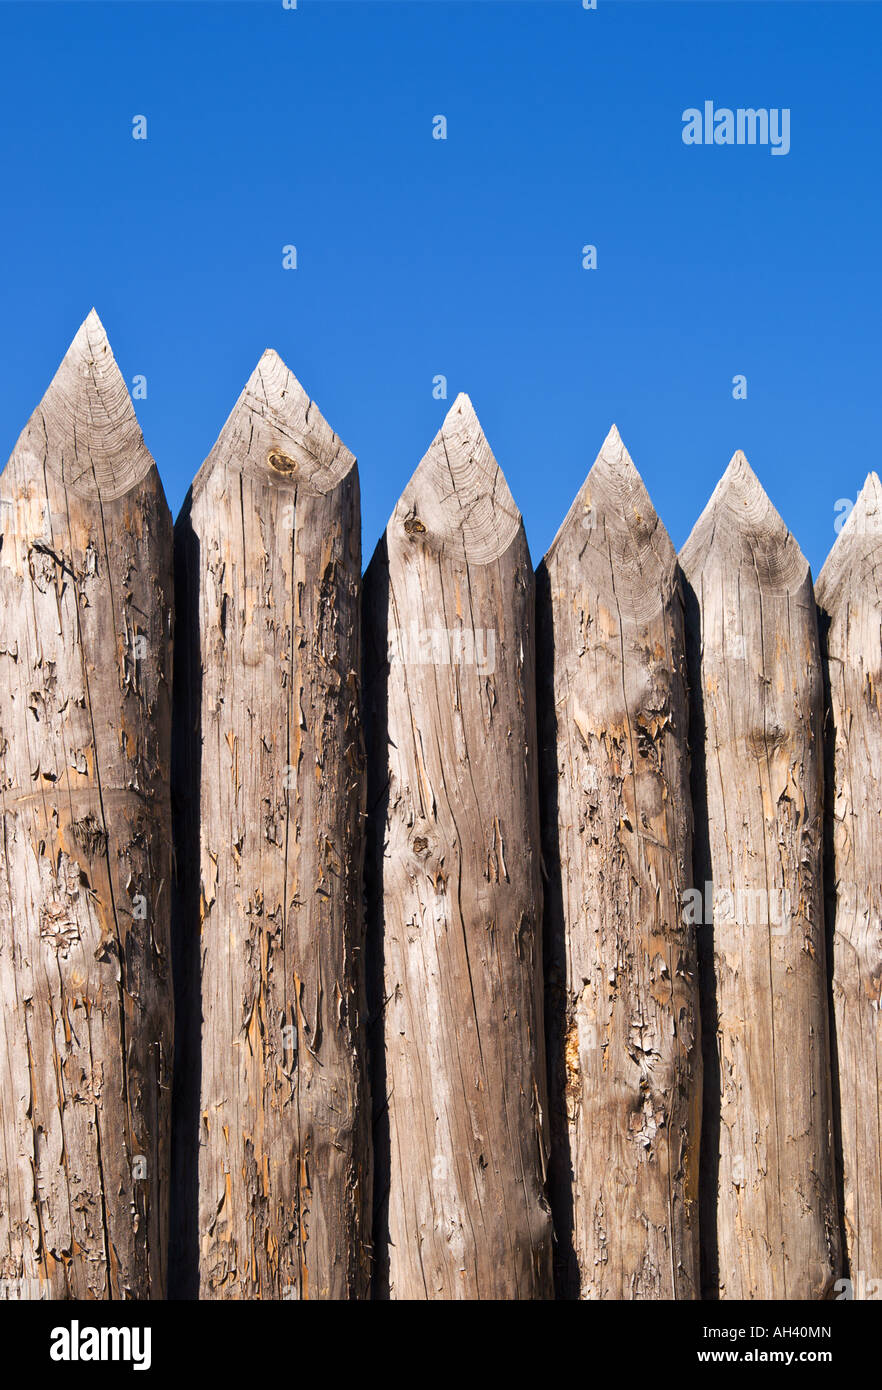 High wall of old wooden sharpened logs over blue sky Stock Photo